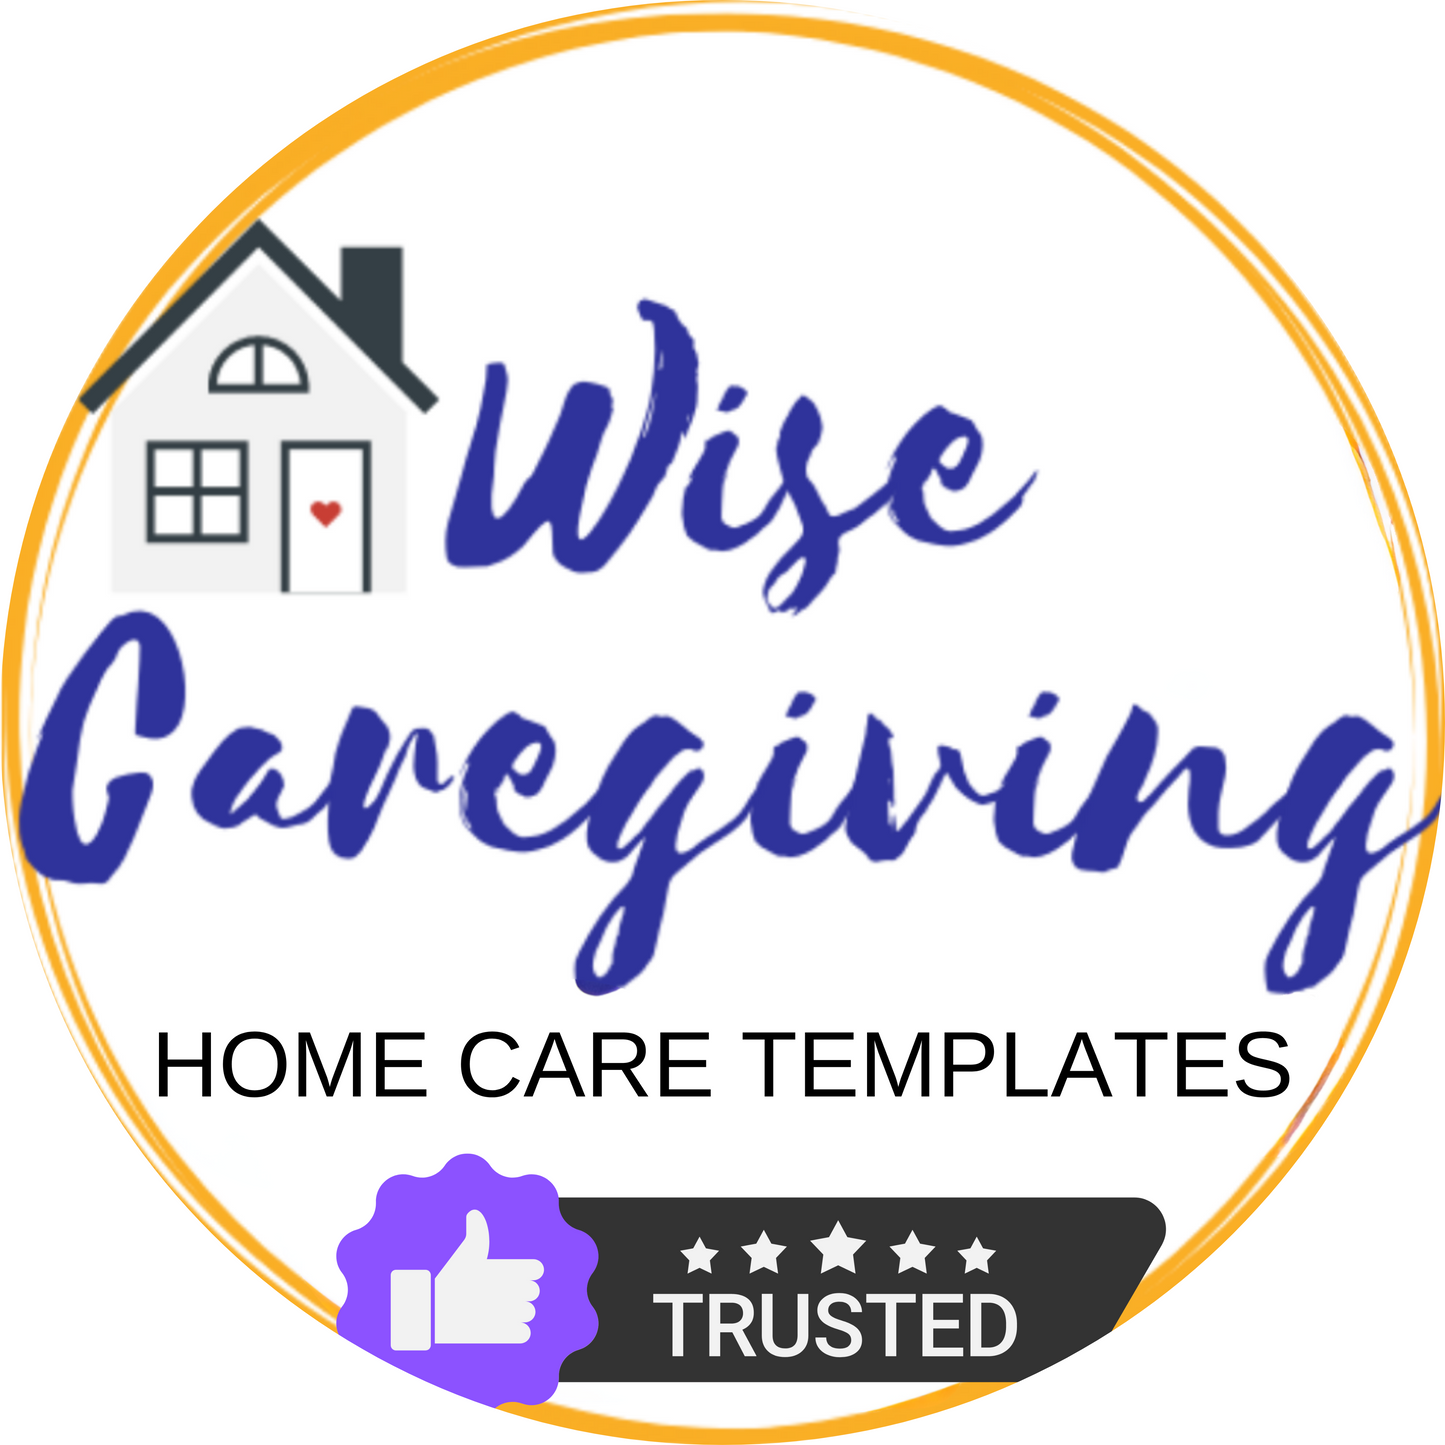 Home Care Client List Template